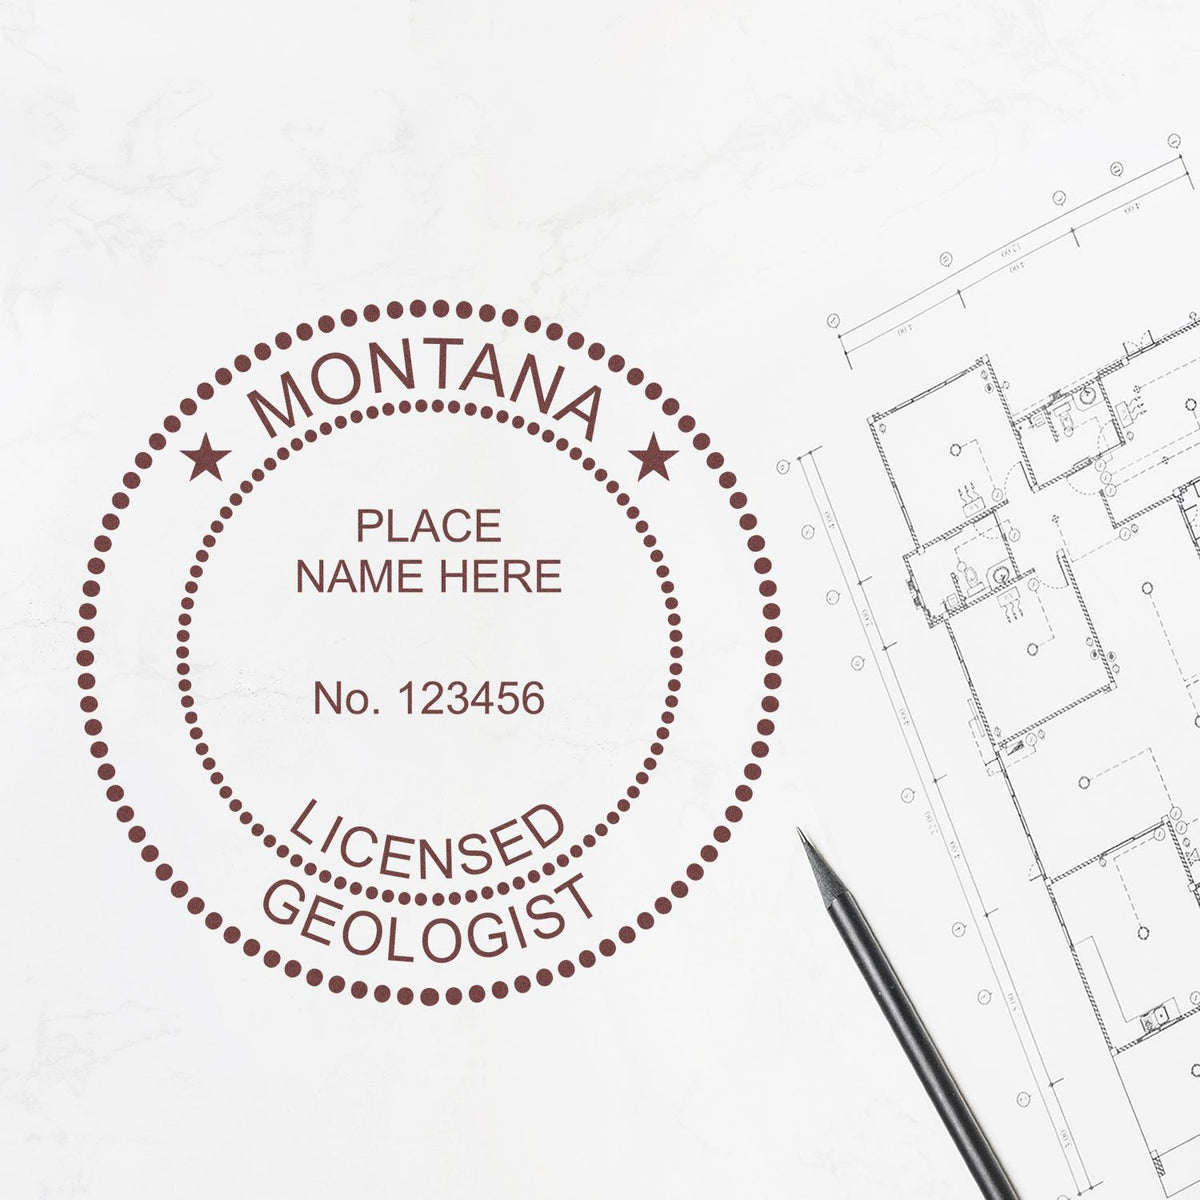 The Self-Inking Montana Geologist Stamp stamp impression comes to life with a crisp, detailed image stamped on paper - showcasing true professional quality.